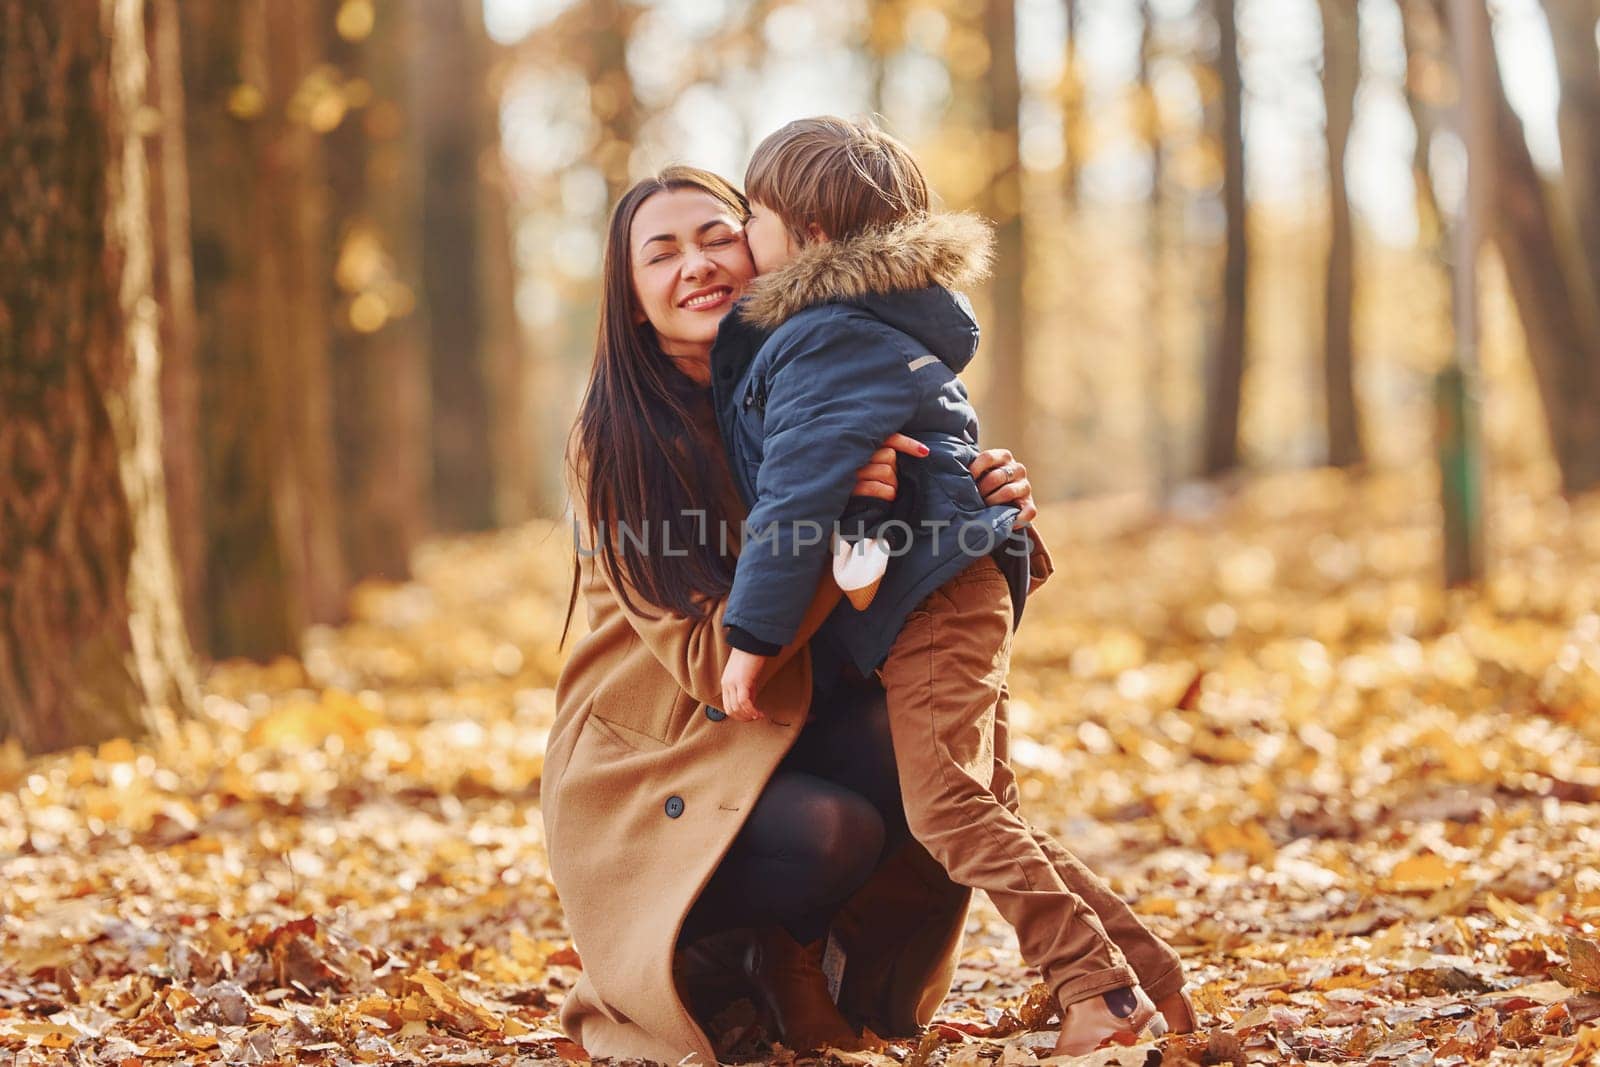 Active weekend time spending. Mother with her son is having fun outdoors in the autumn forest.